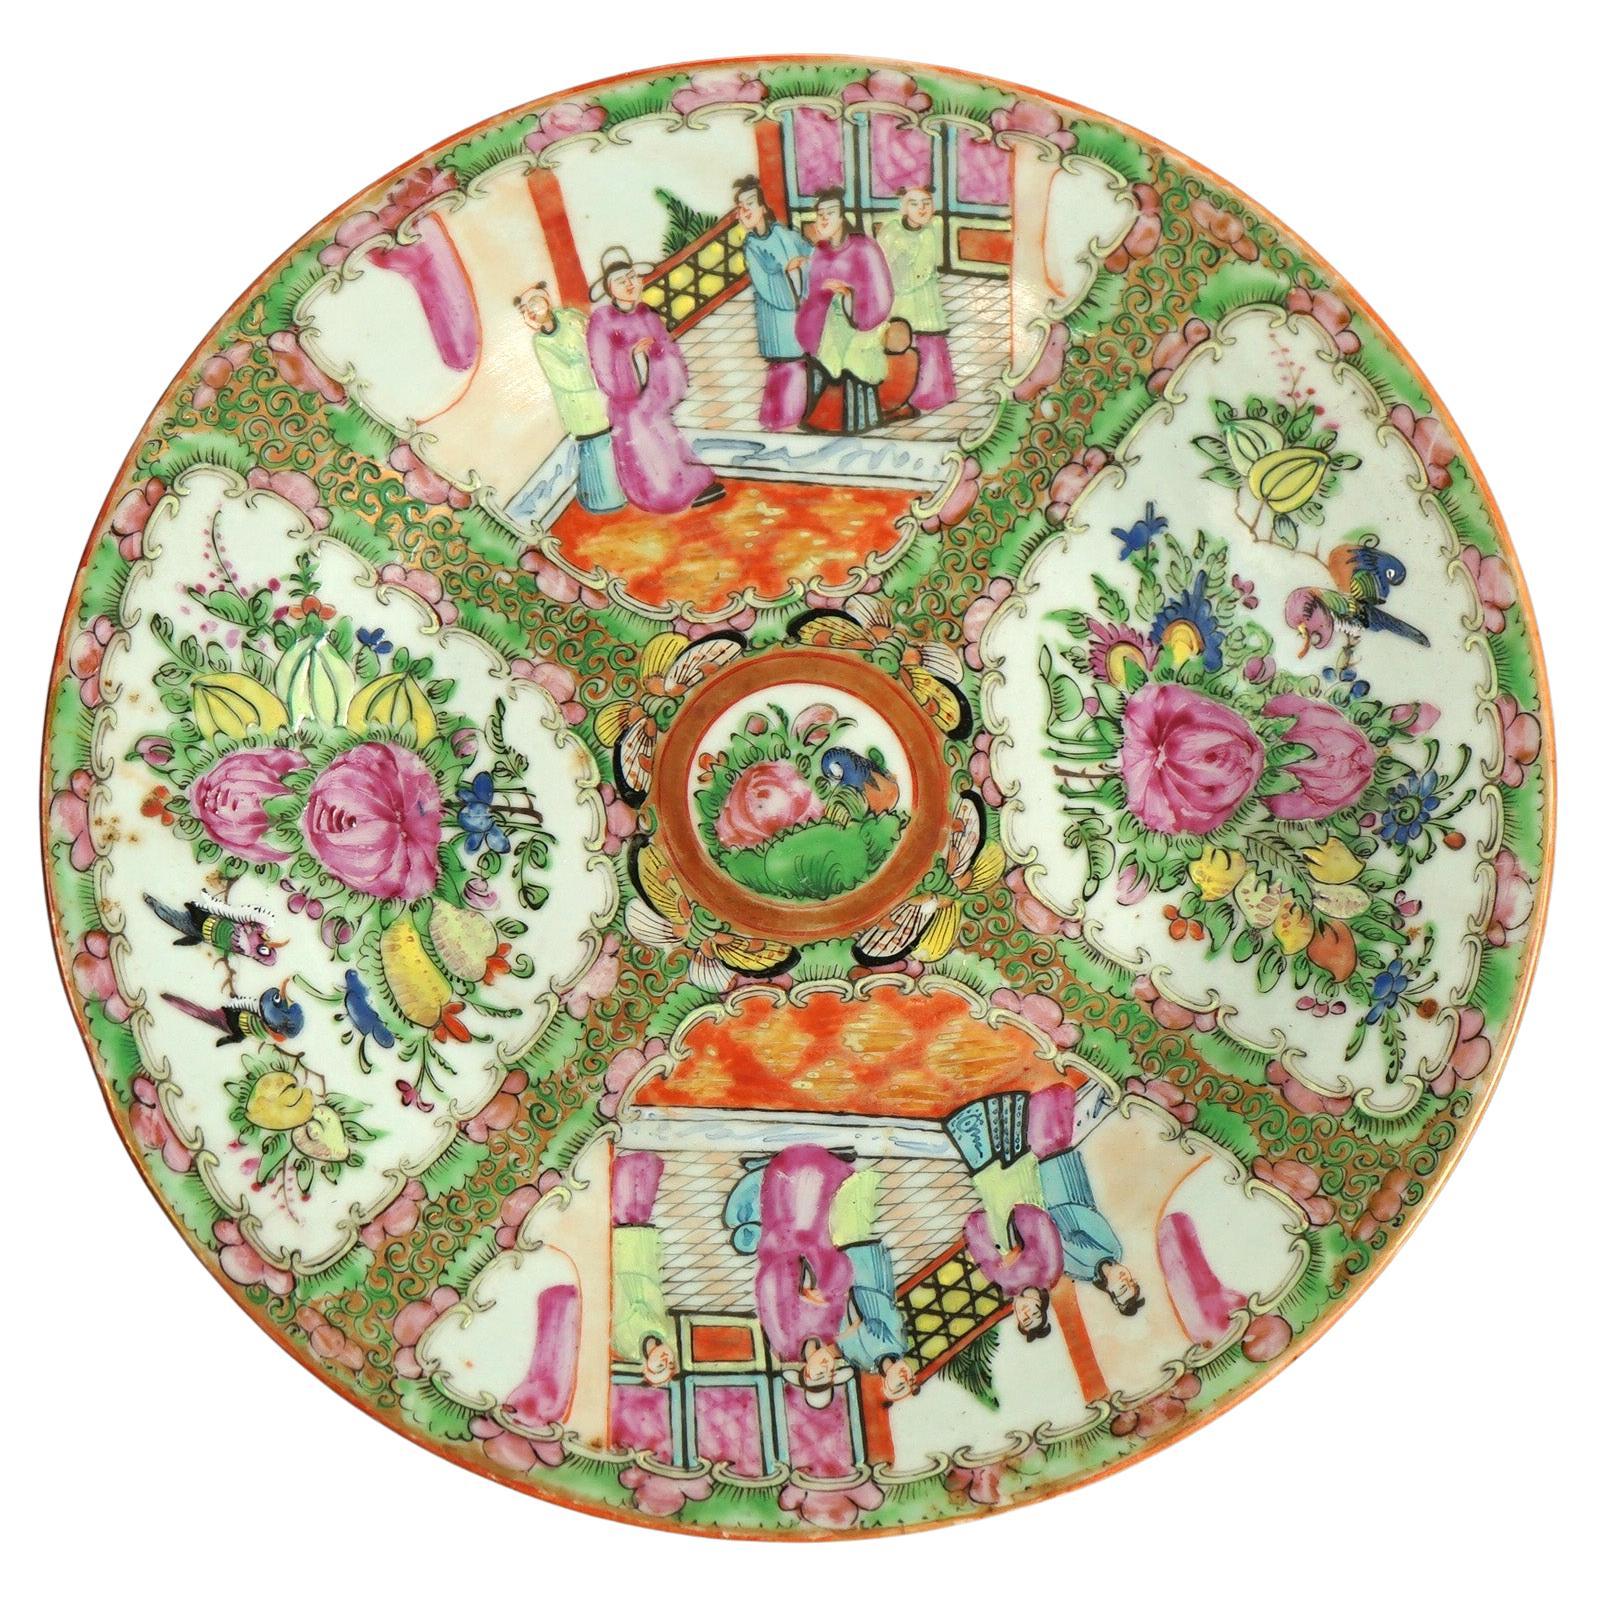 Antique Chinese Rose Medallion Porcelain Charger with Gardens & Figures C1900 For Sale